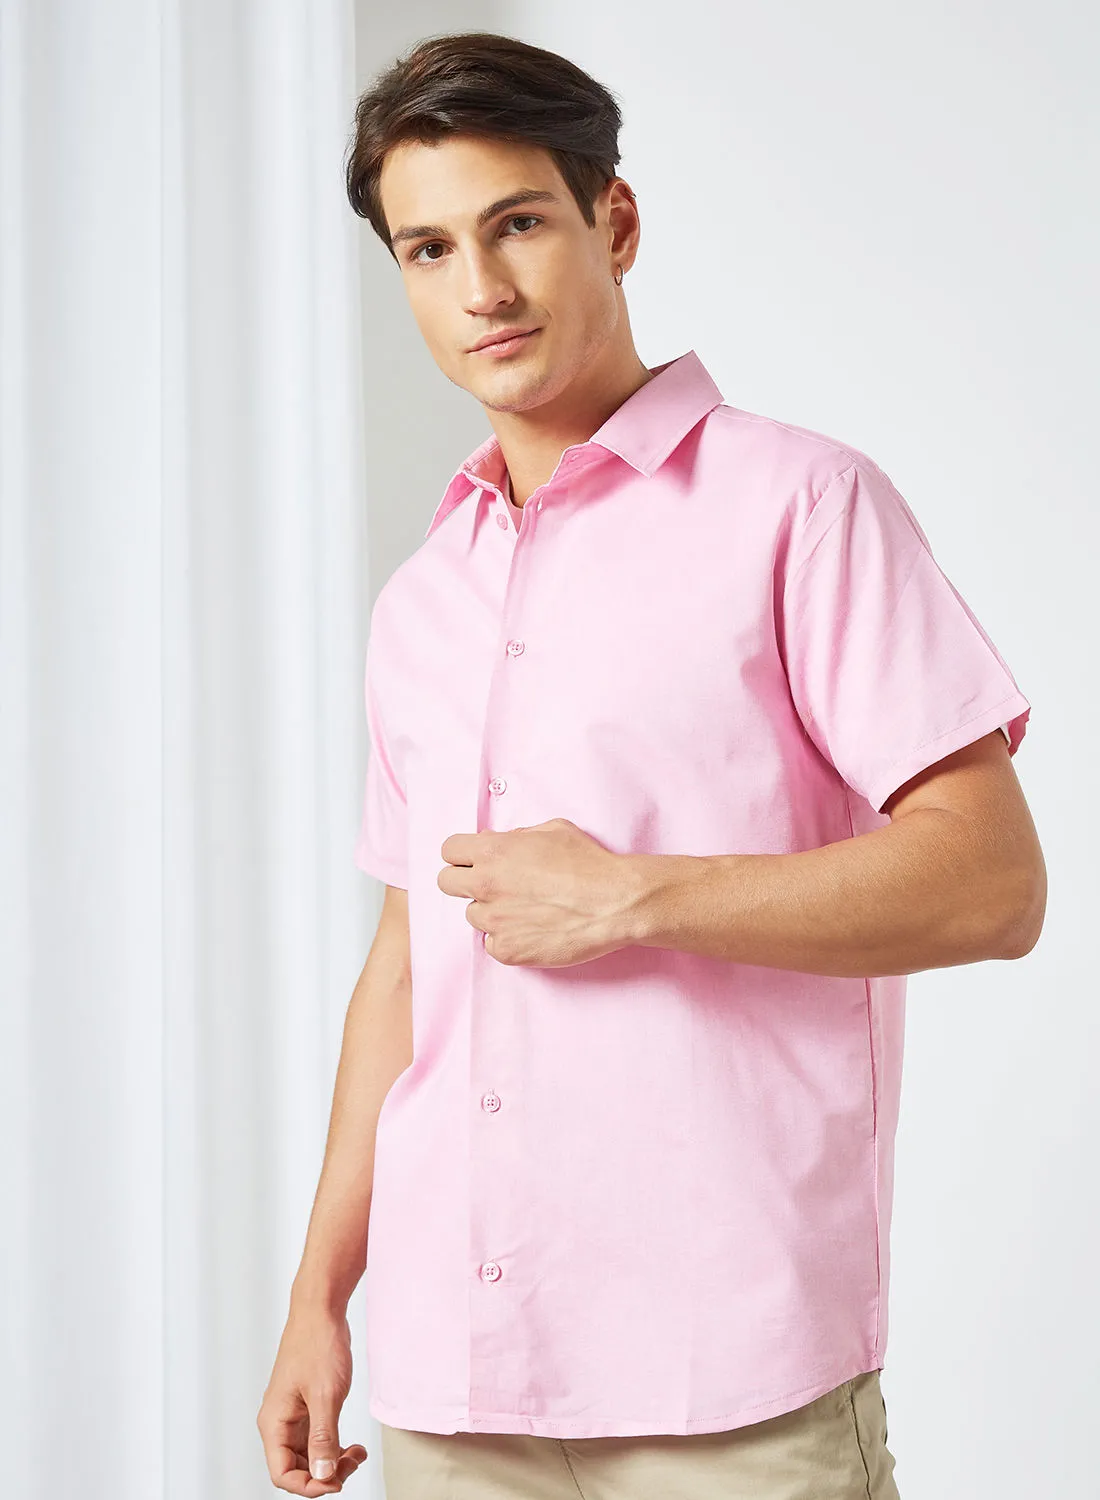 STATE 8 Oxford Chambray Short Sleeve Shirt Pink